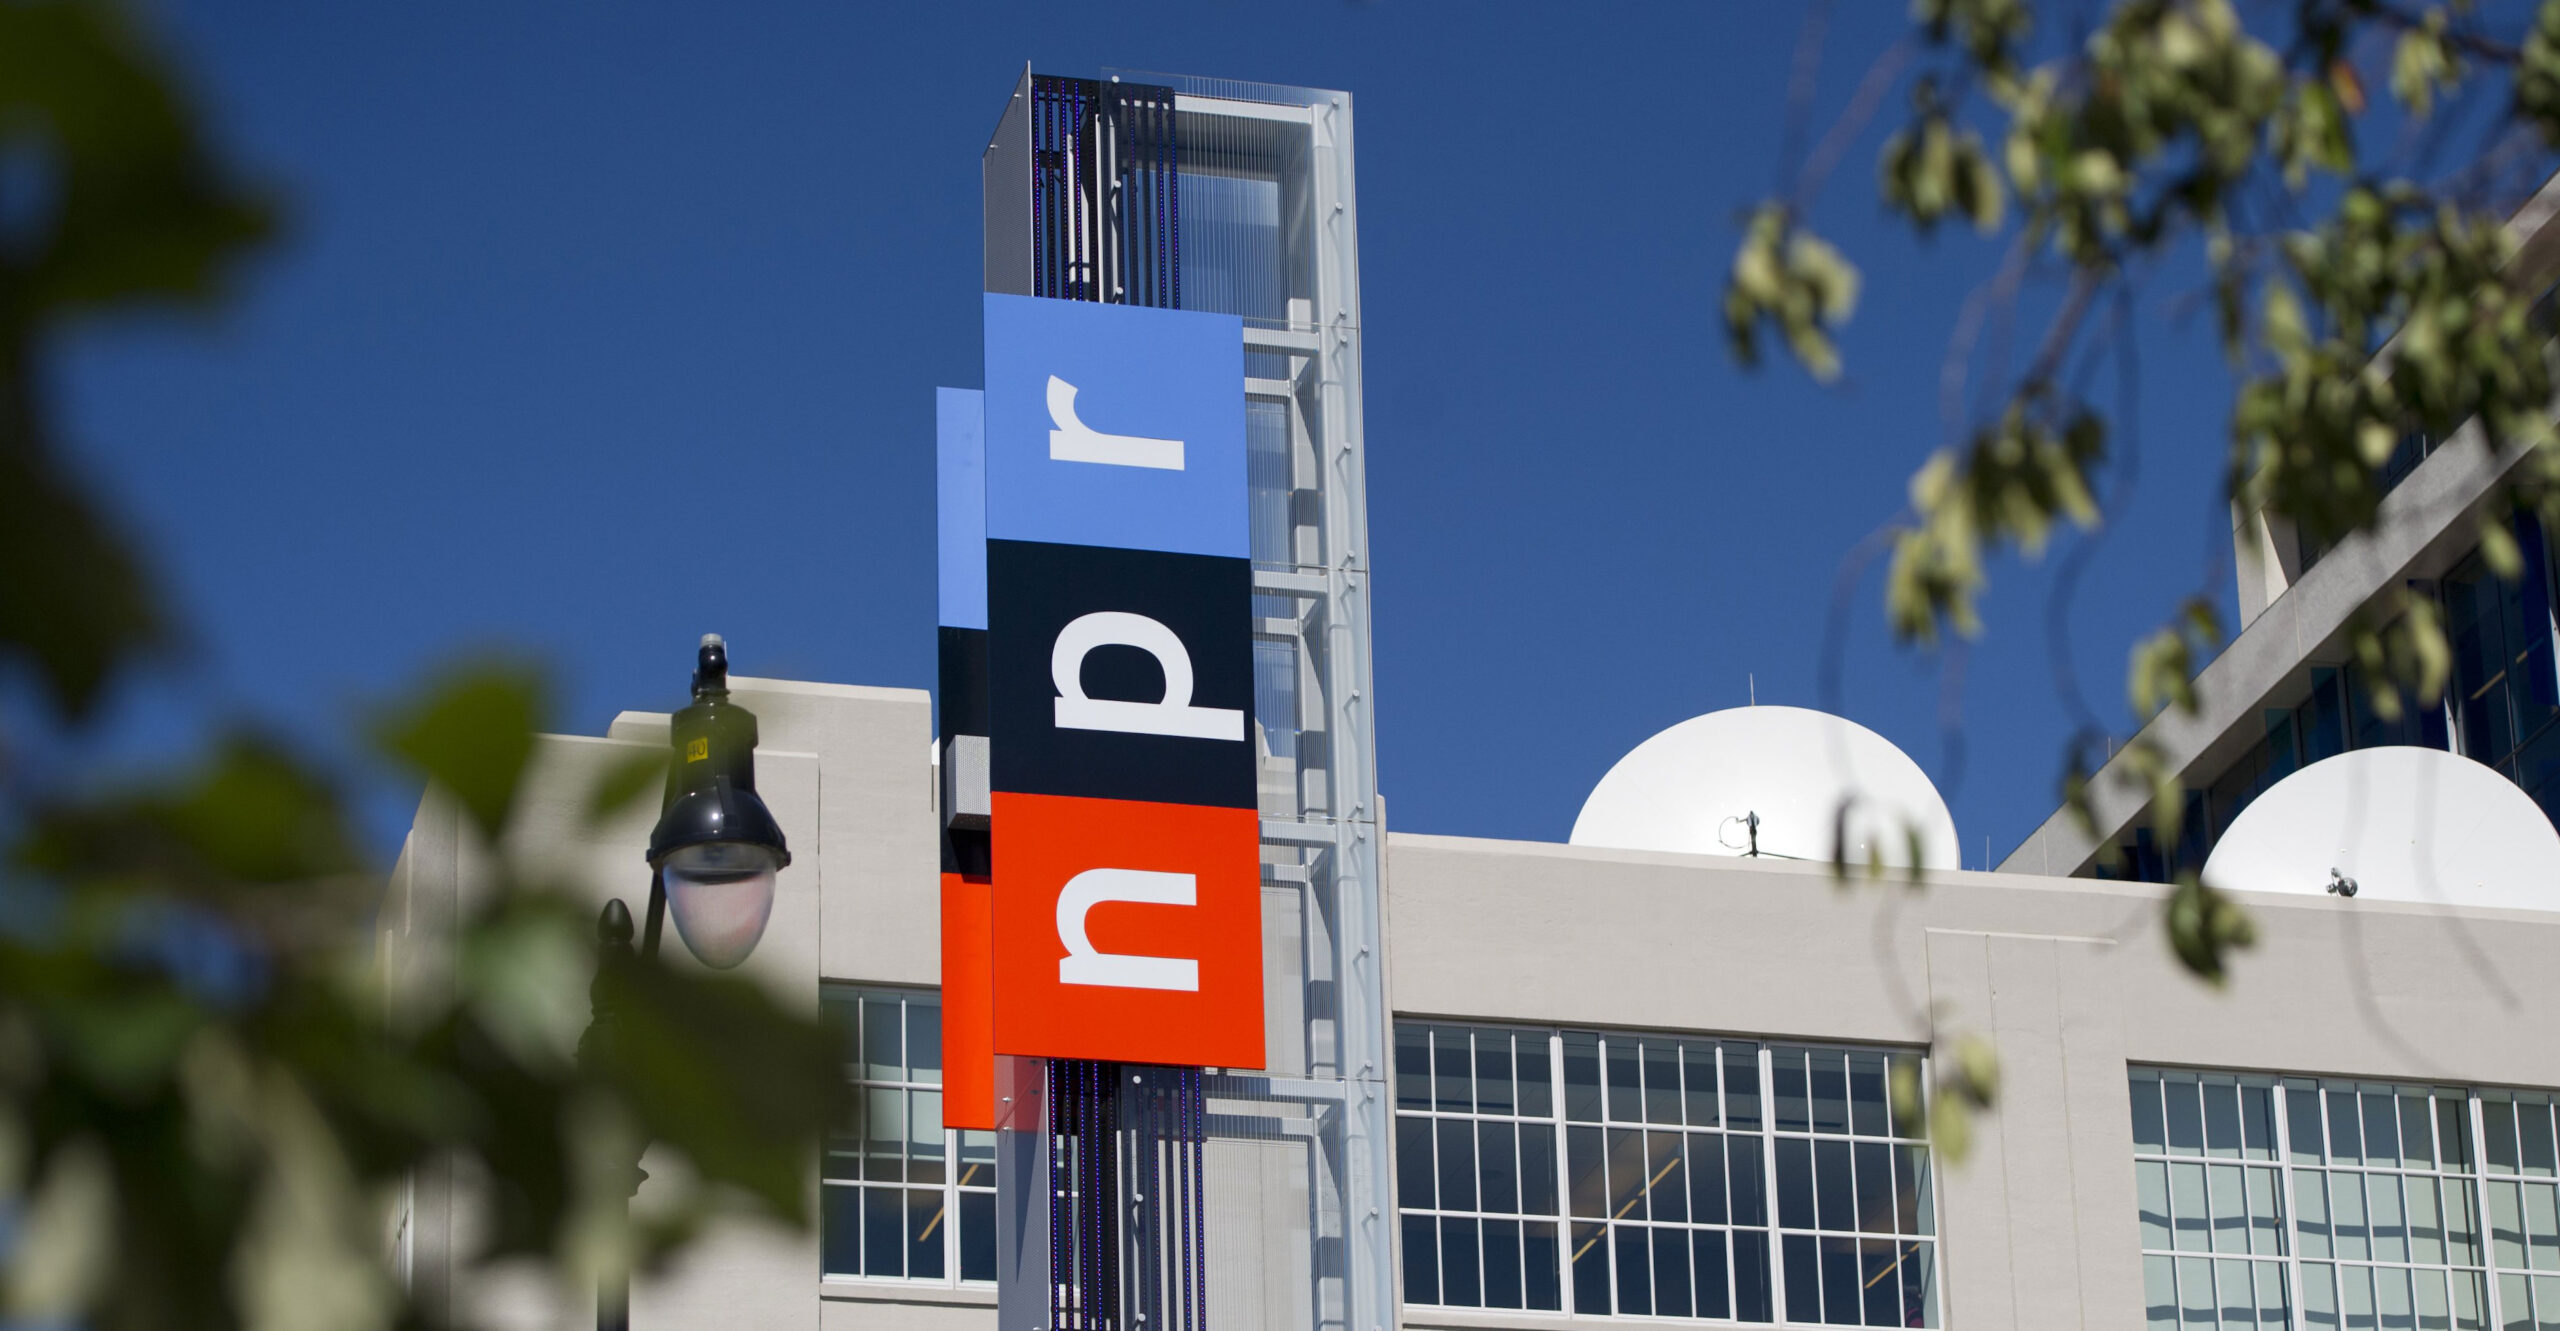 Yet Another Example of Why Taxpayers Shouldn't Fund One-Sided, Woke Public Broadcasting